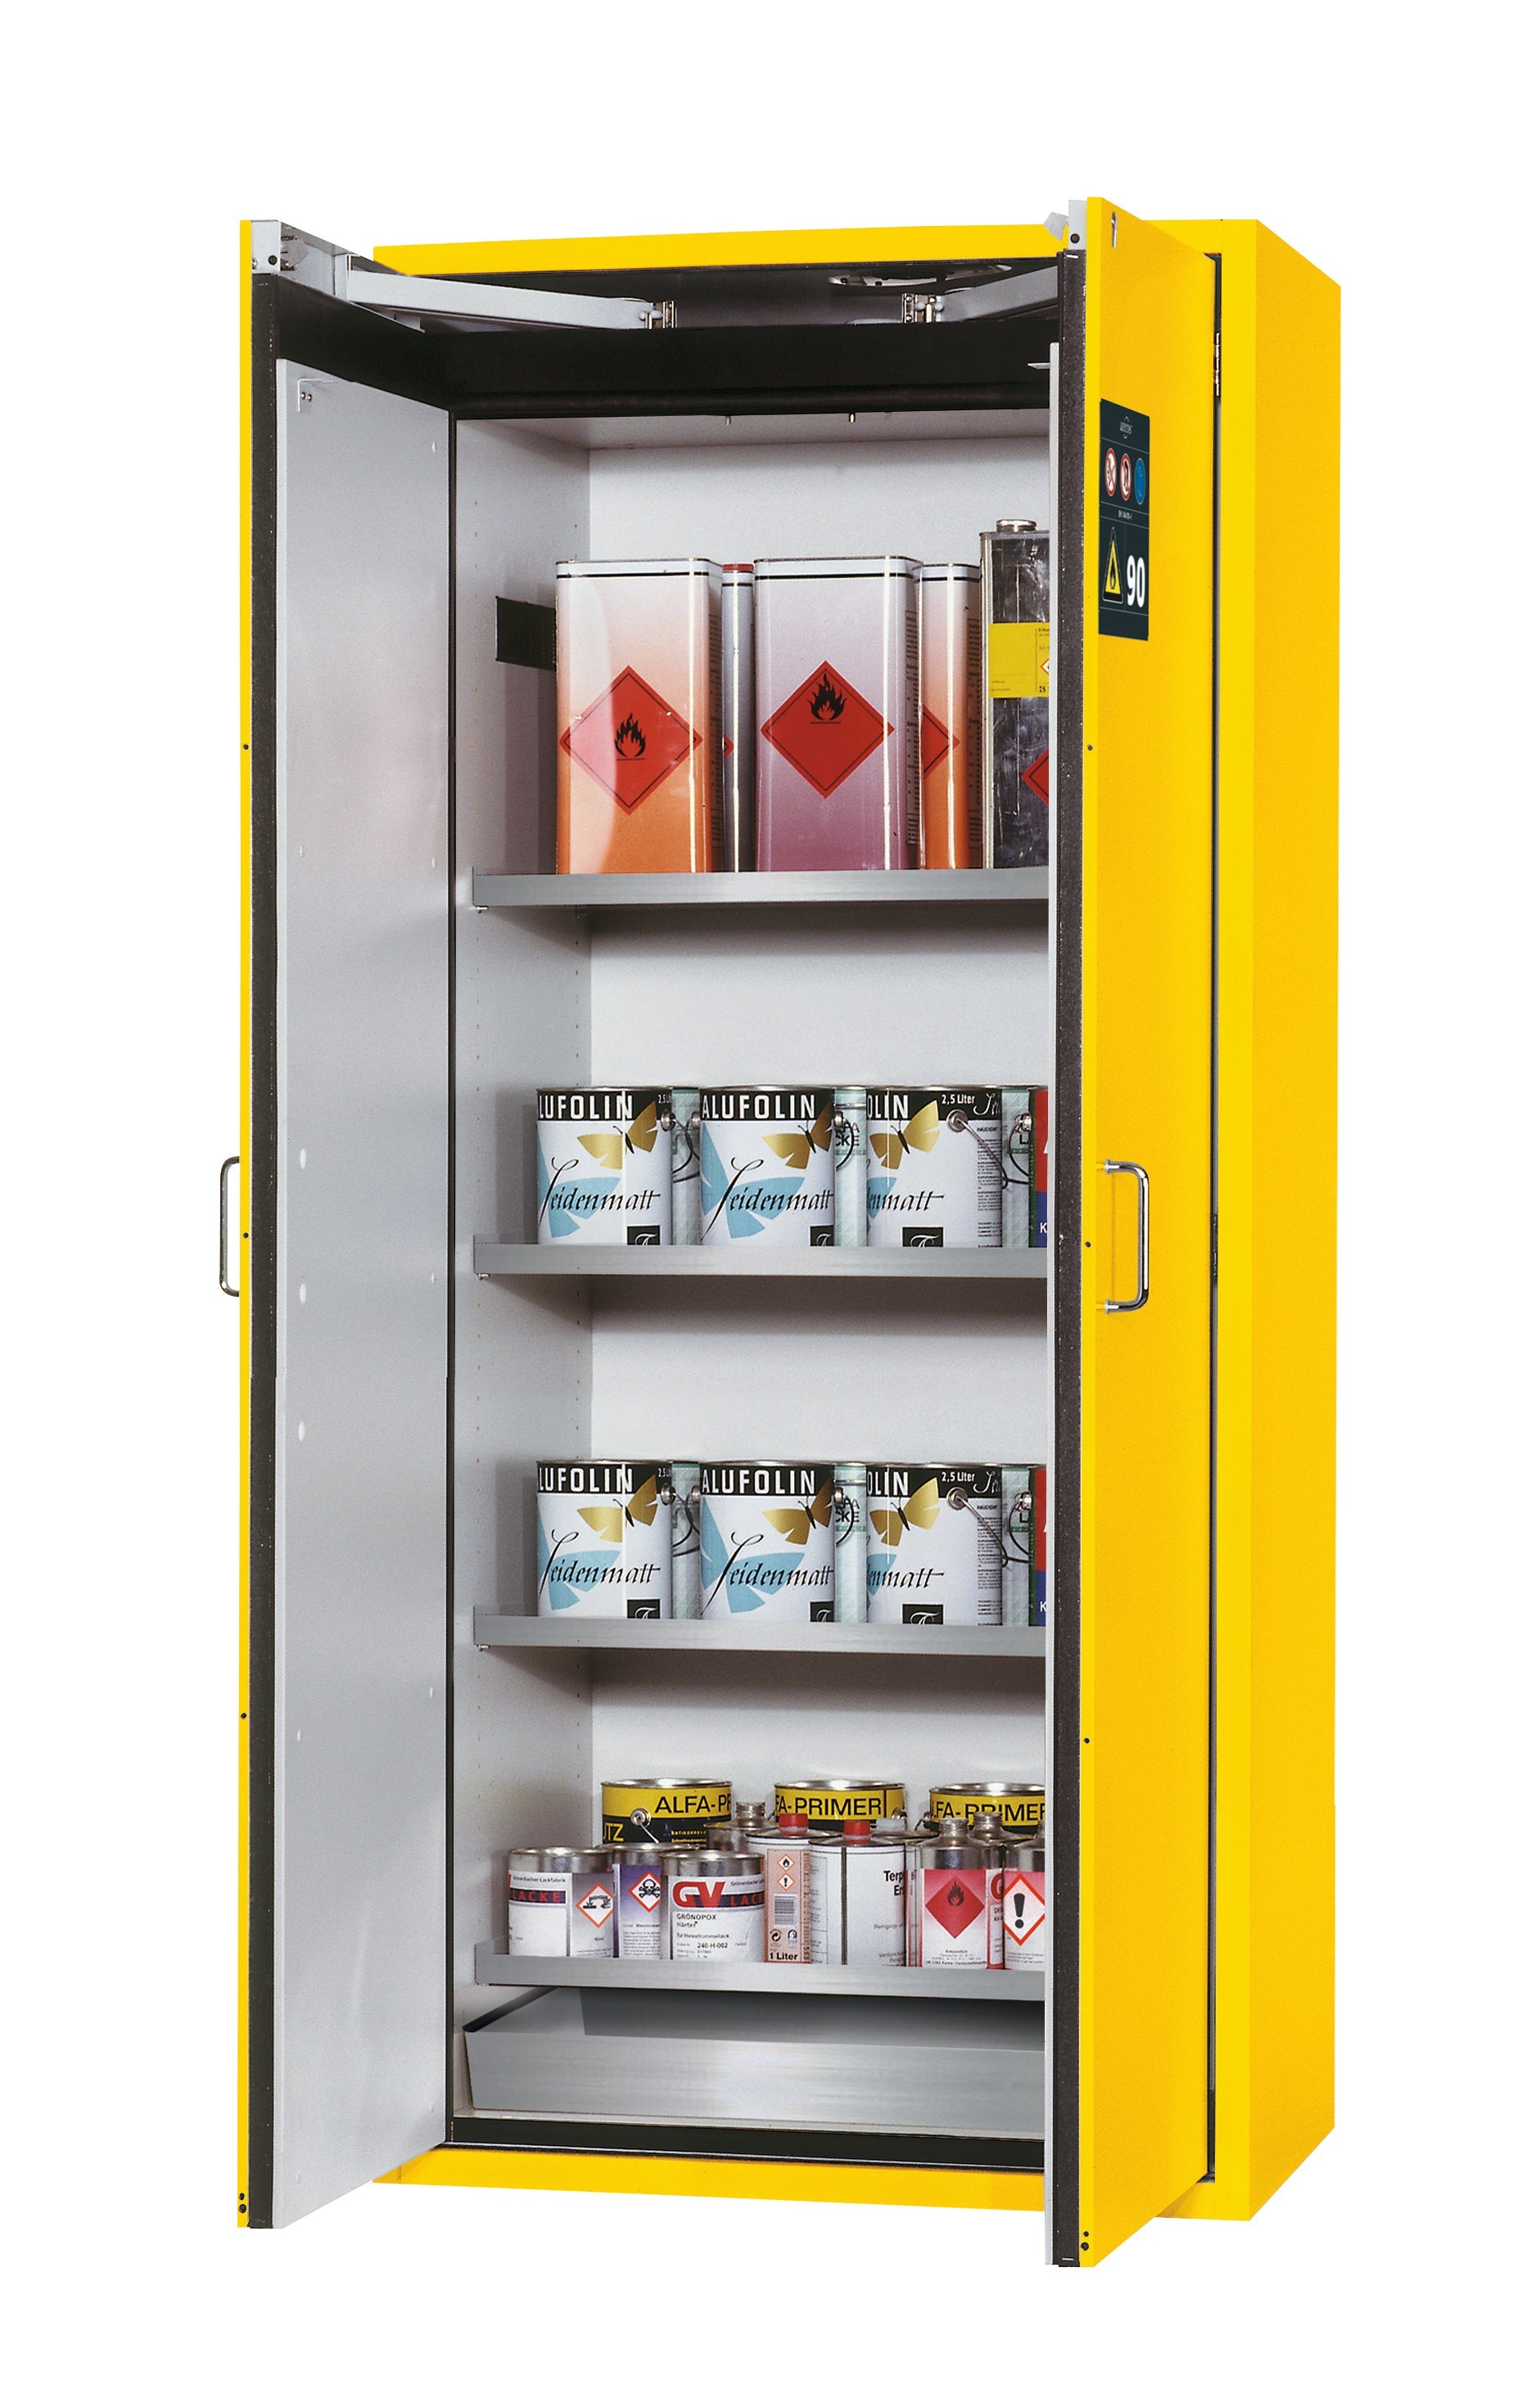 Type 90 safety cabinet S-CLASSIC-90 model S90.196.090 in safety yellow RAL 1004 with 4x standard shelves (stainless steel 1.4301)